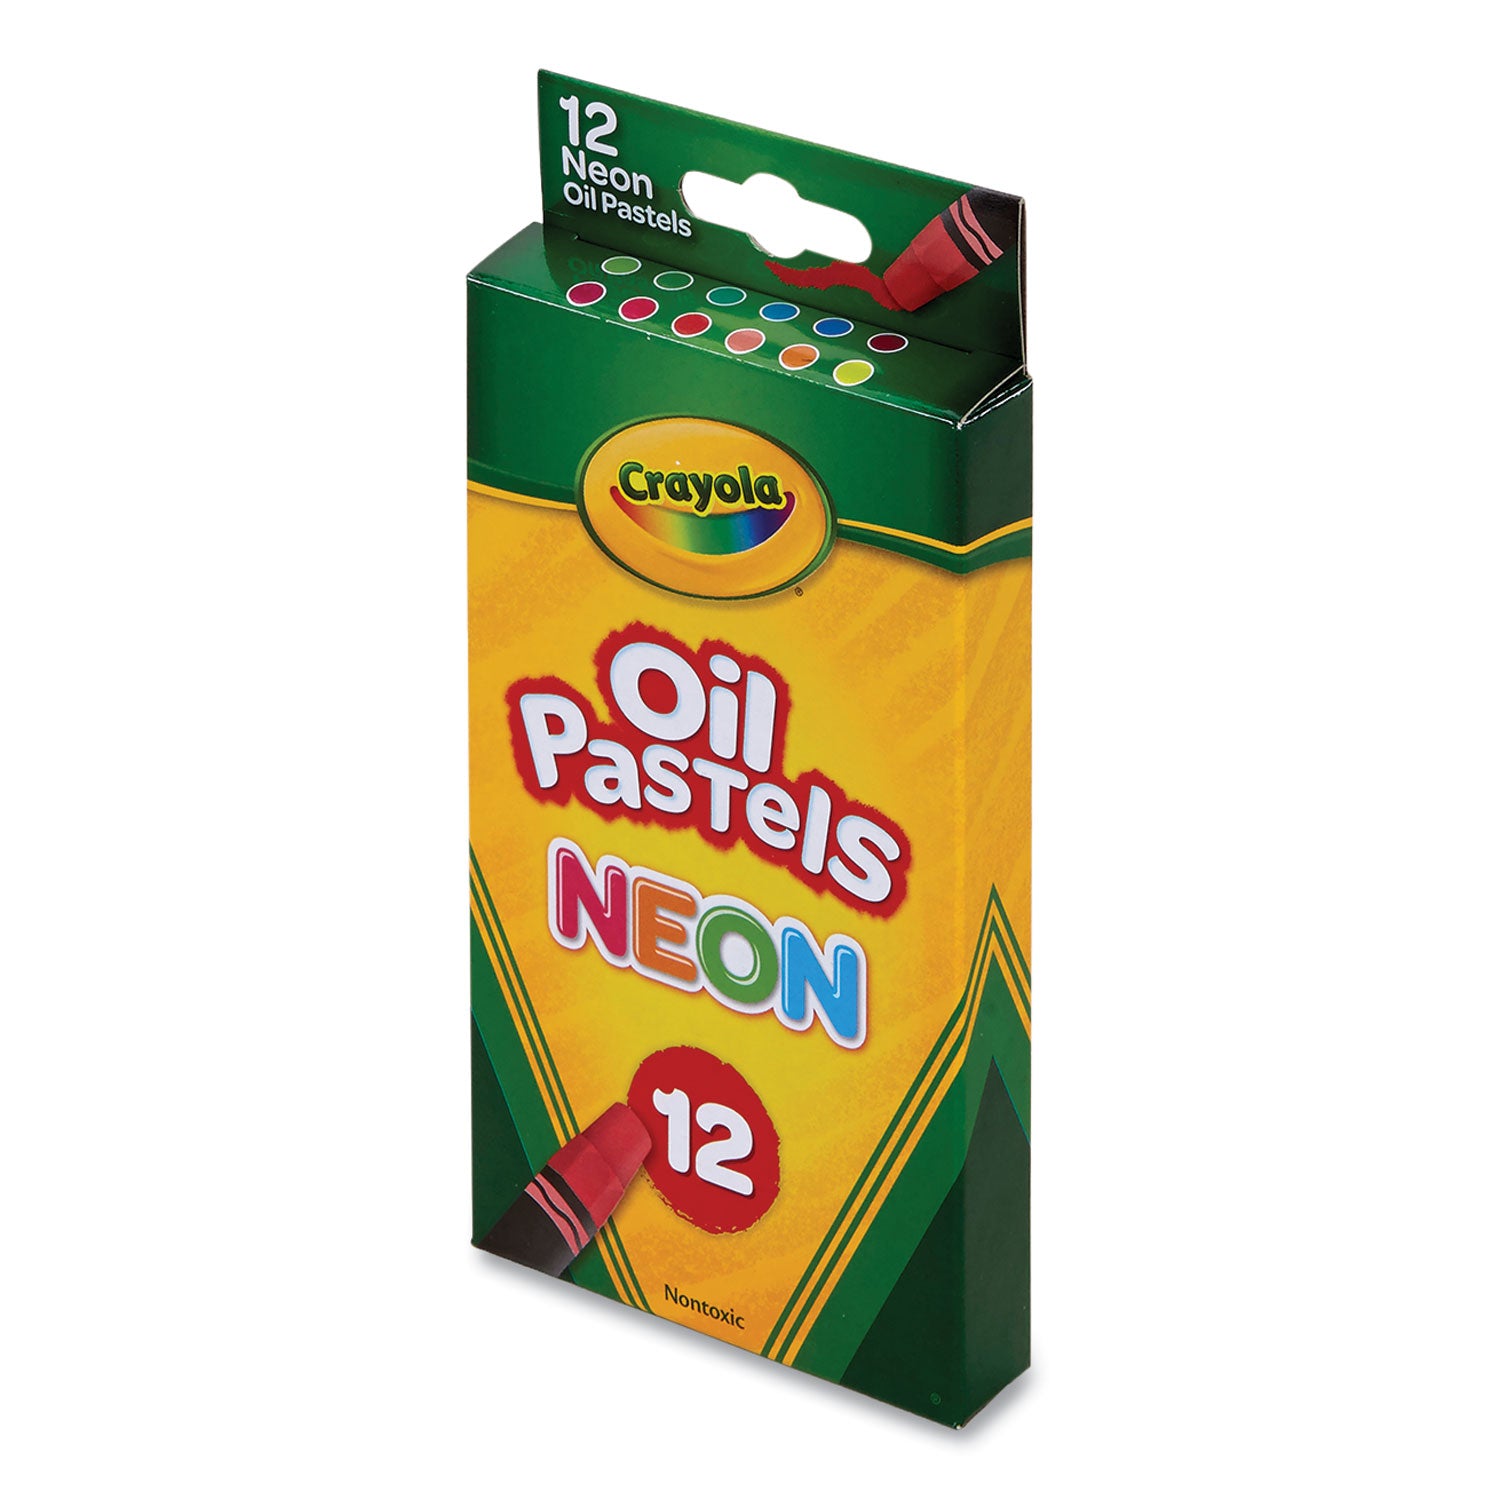 neon-oil-pastels-12-assorted-colors-12-pack_cyo524613 - 8